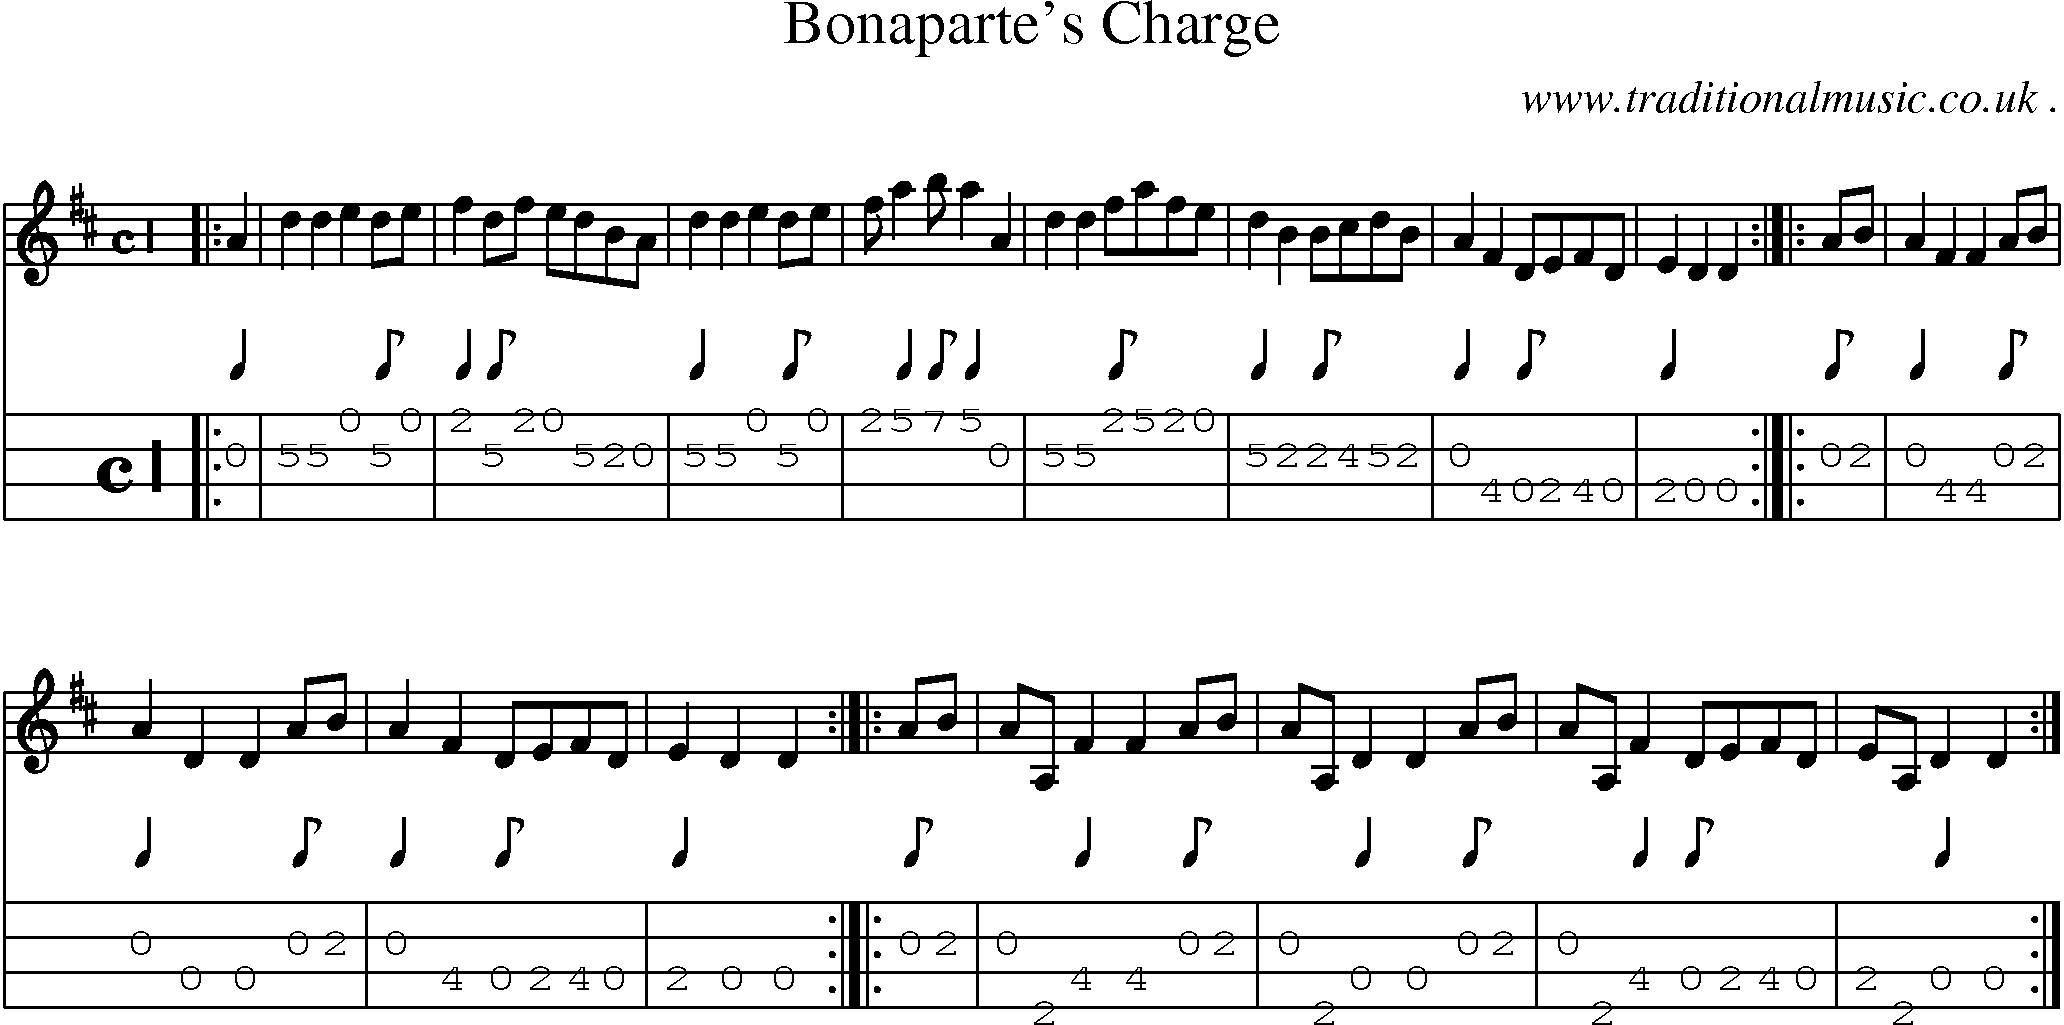 Music Score and Mandolin Tabs for Bonapartes Charge